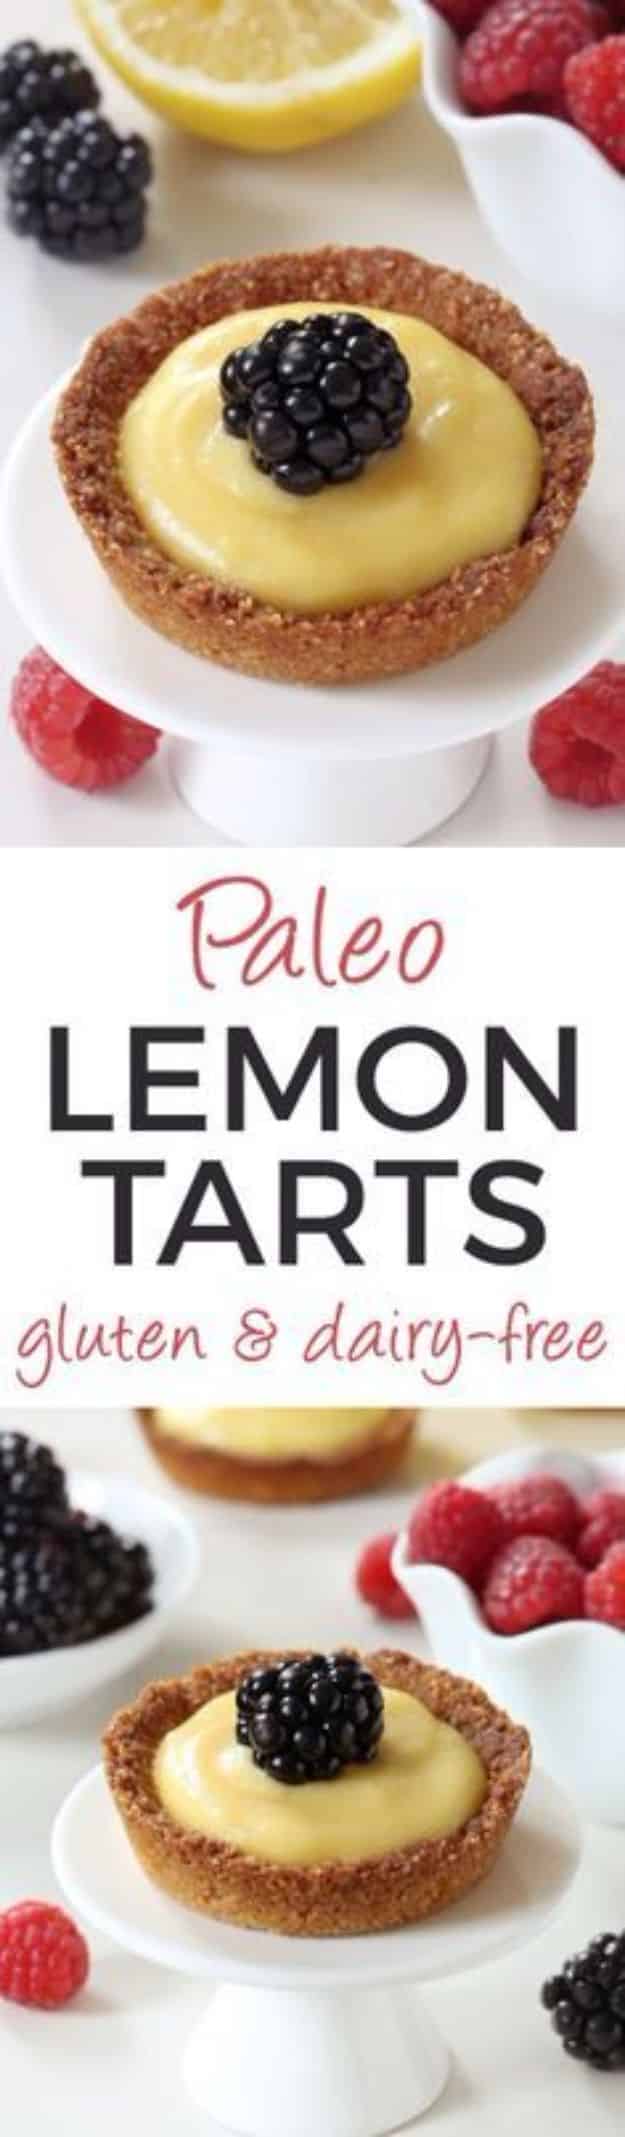 Gluten Free Desserts - Paleo Mini Lemon Tarts - Easy Recipes and Healthy Recipe Ideas for Cookies, Cake, Pie, Cupcakes, Cheesecake and Ice Cream - Best No Sugar Glutenfree Chocolate, No Bake Dessert, Fruit, Peach, Apple and Banana Dishes - Flourless Christmas, Thanksgiving and Holiday Dishes #glutenfree #desserts #recipes